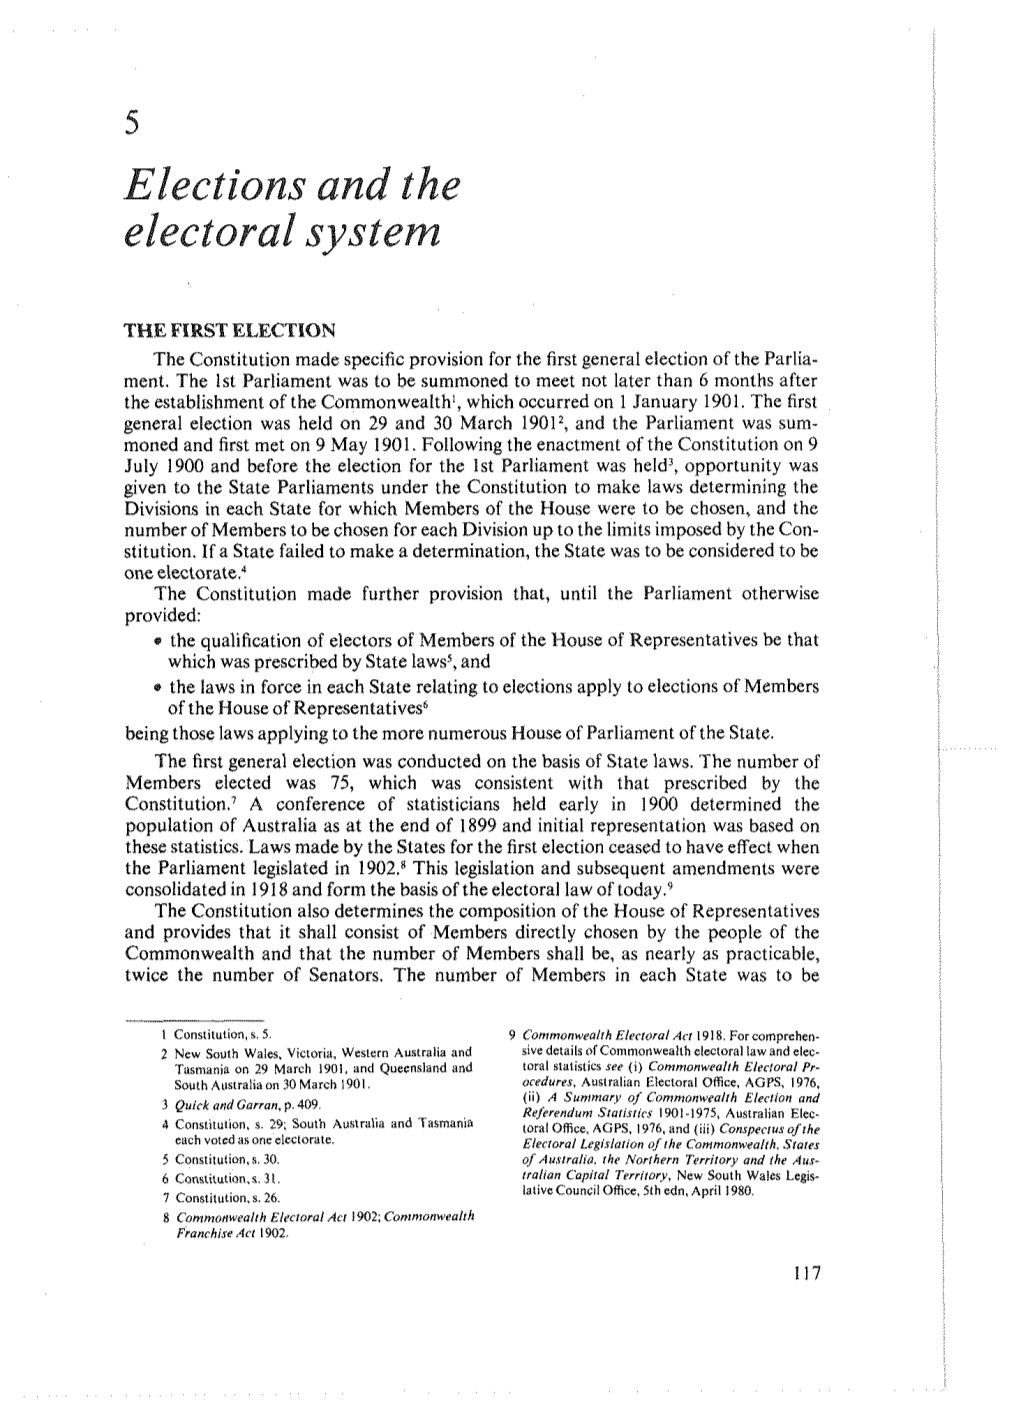 Elections and the Electoral System